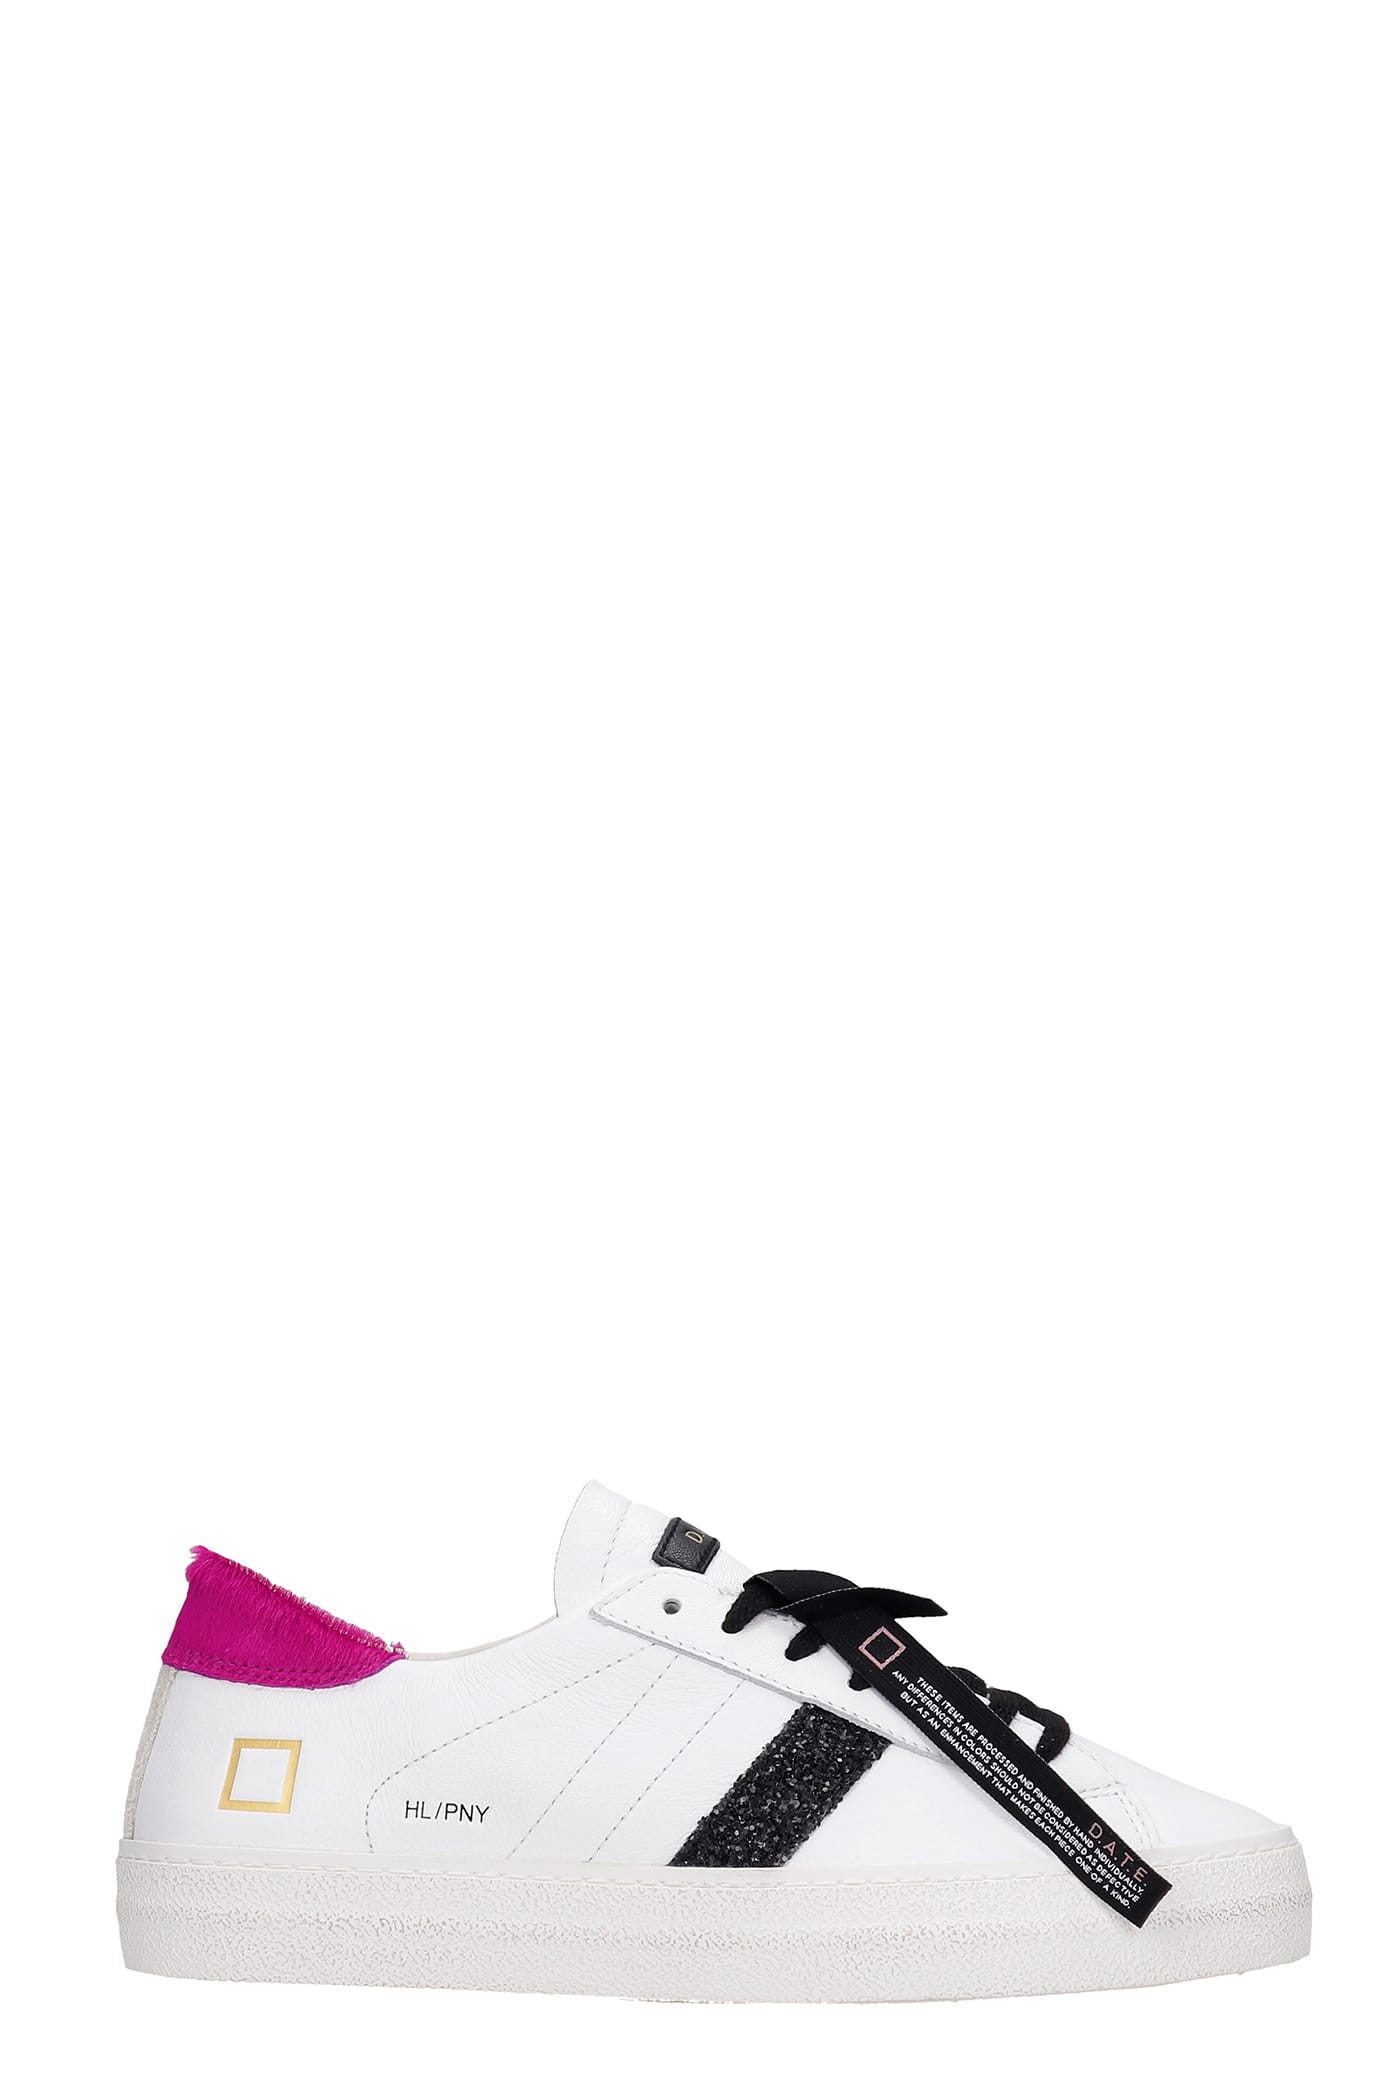 DATE HILL LOW SNEAKERS IN WHITE LEATHER,W341HLPNWF